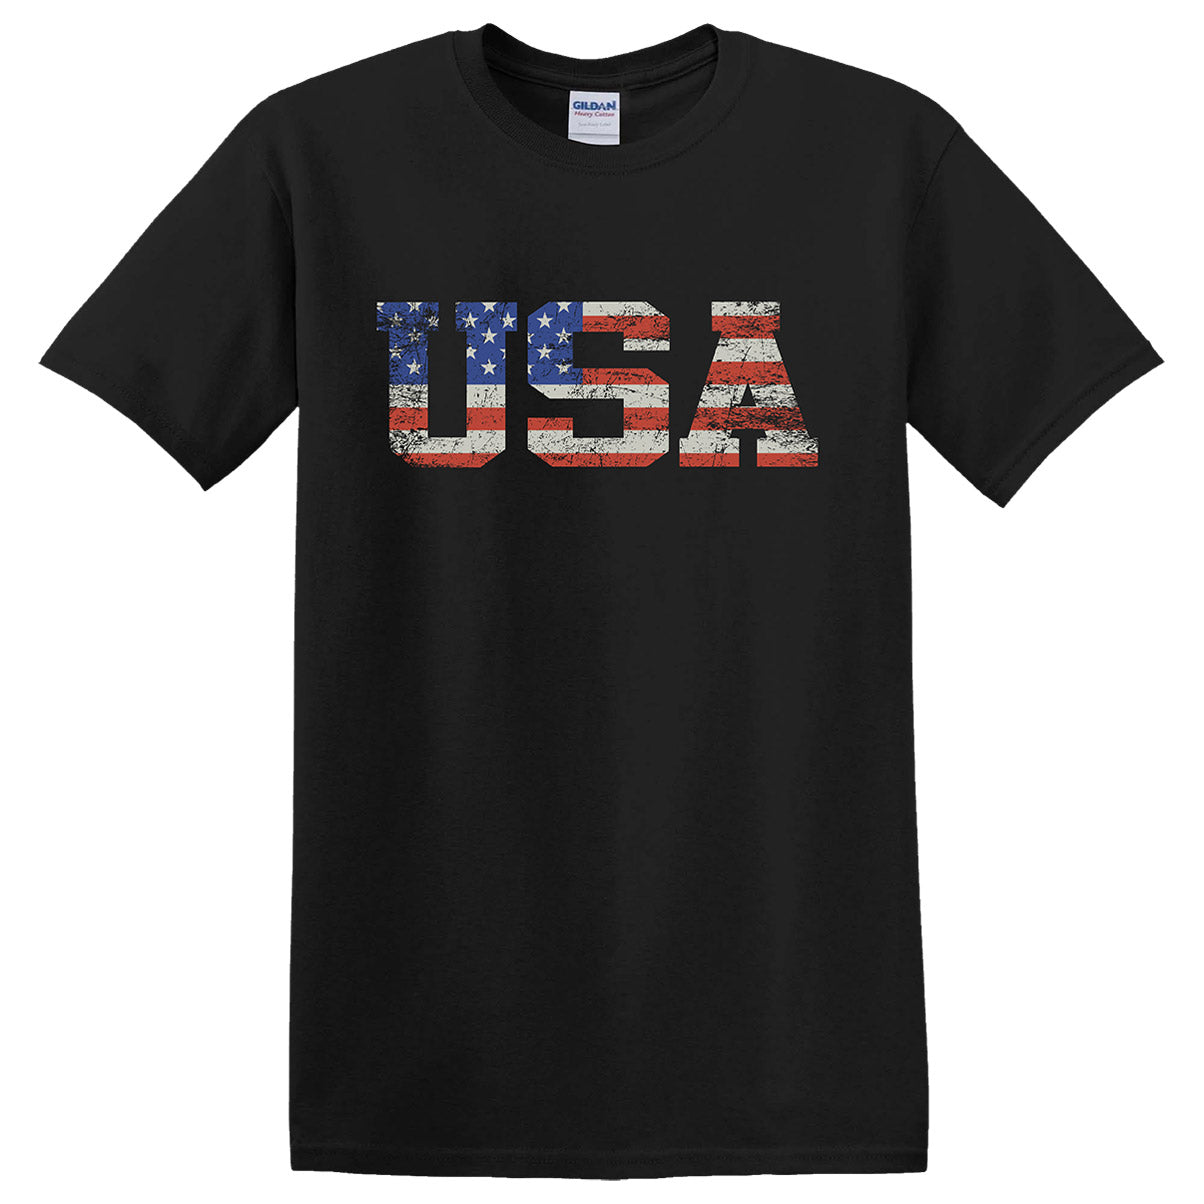 USA Distressed Design Full Front Shirt